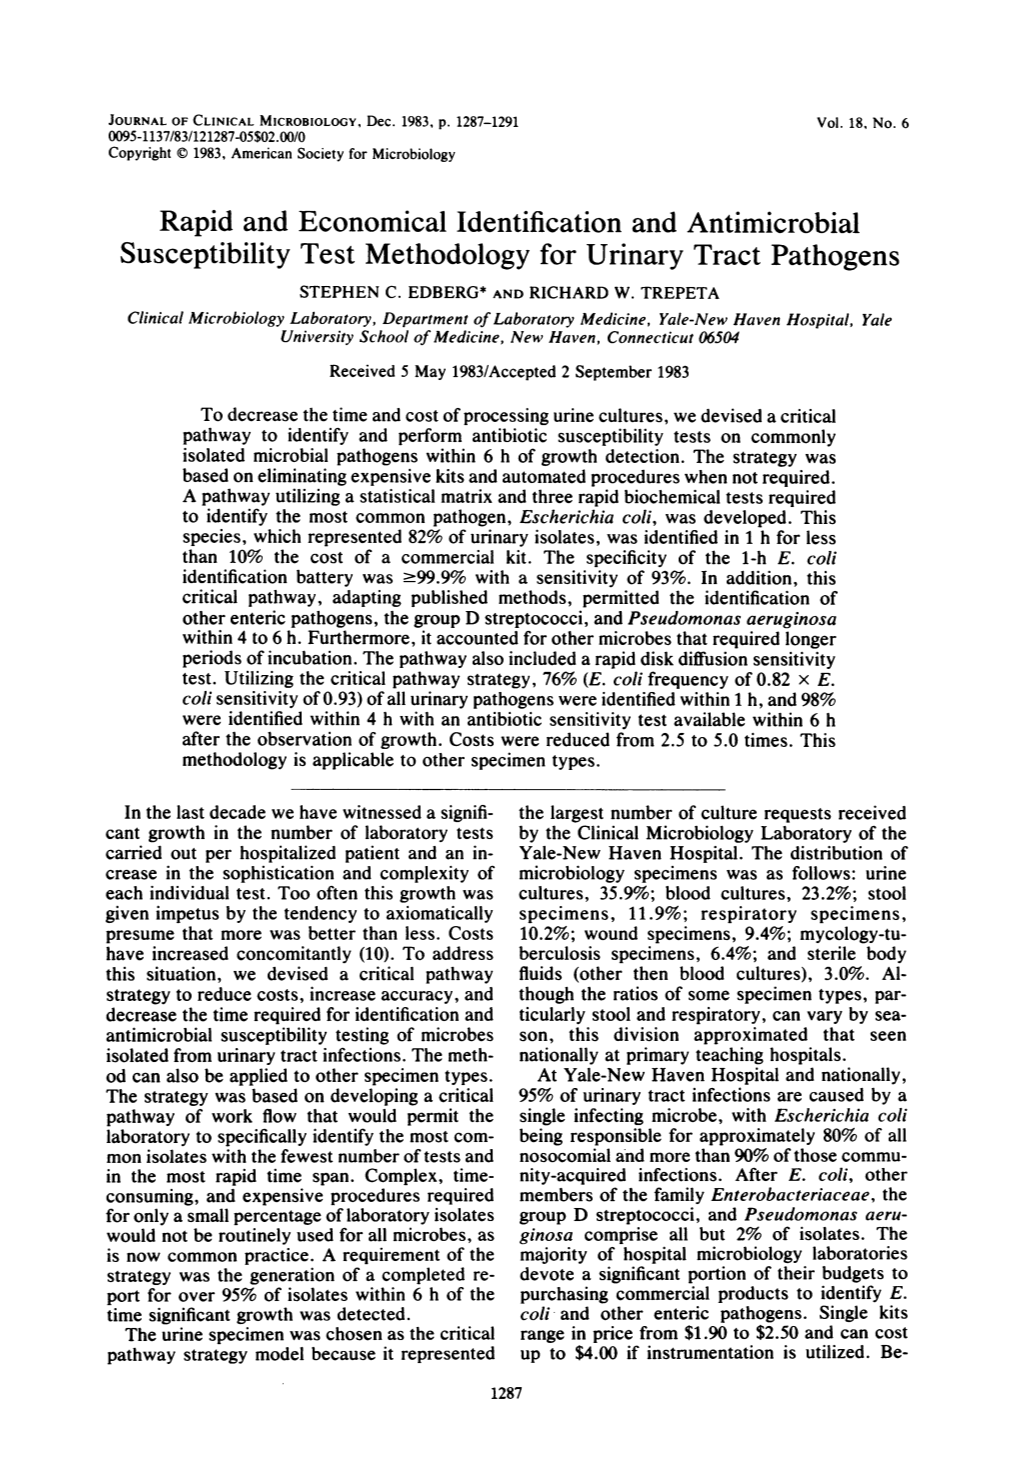 Rapid and Economical Identification and Antimicrobial Susceptibility Test Methodology for Urinary Tract Pathogens